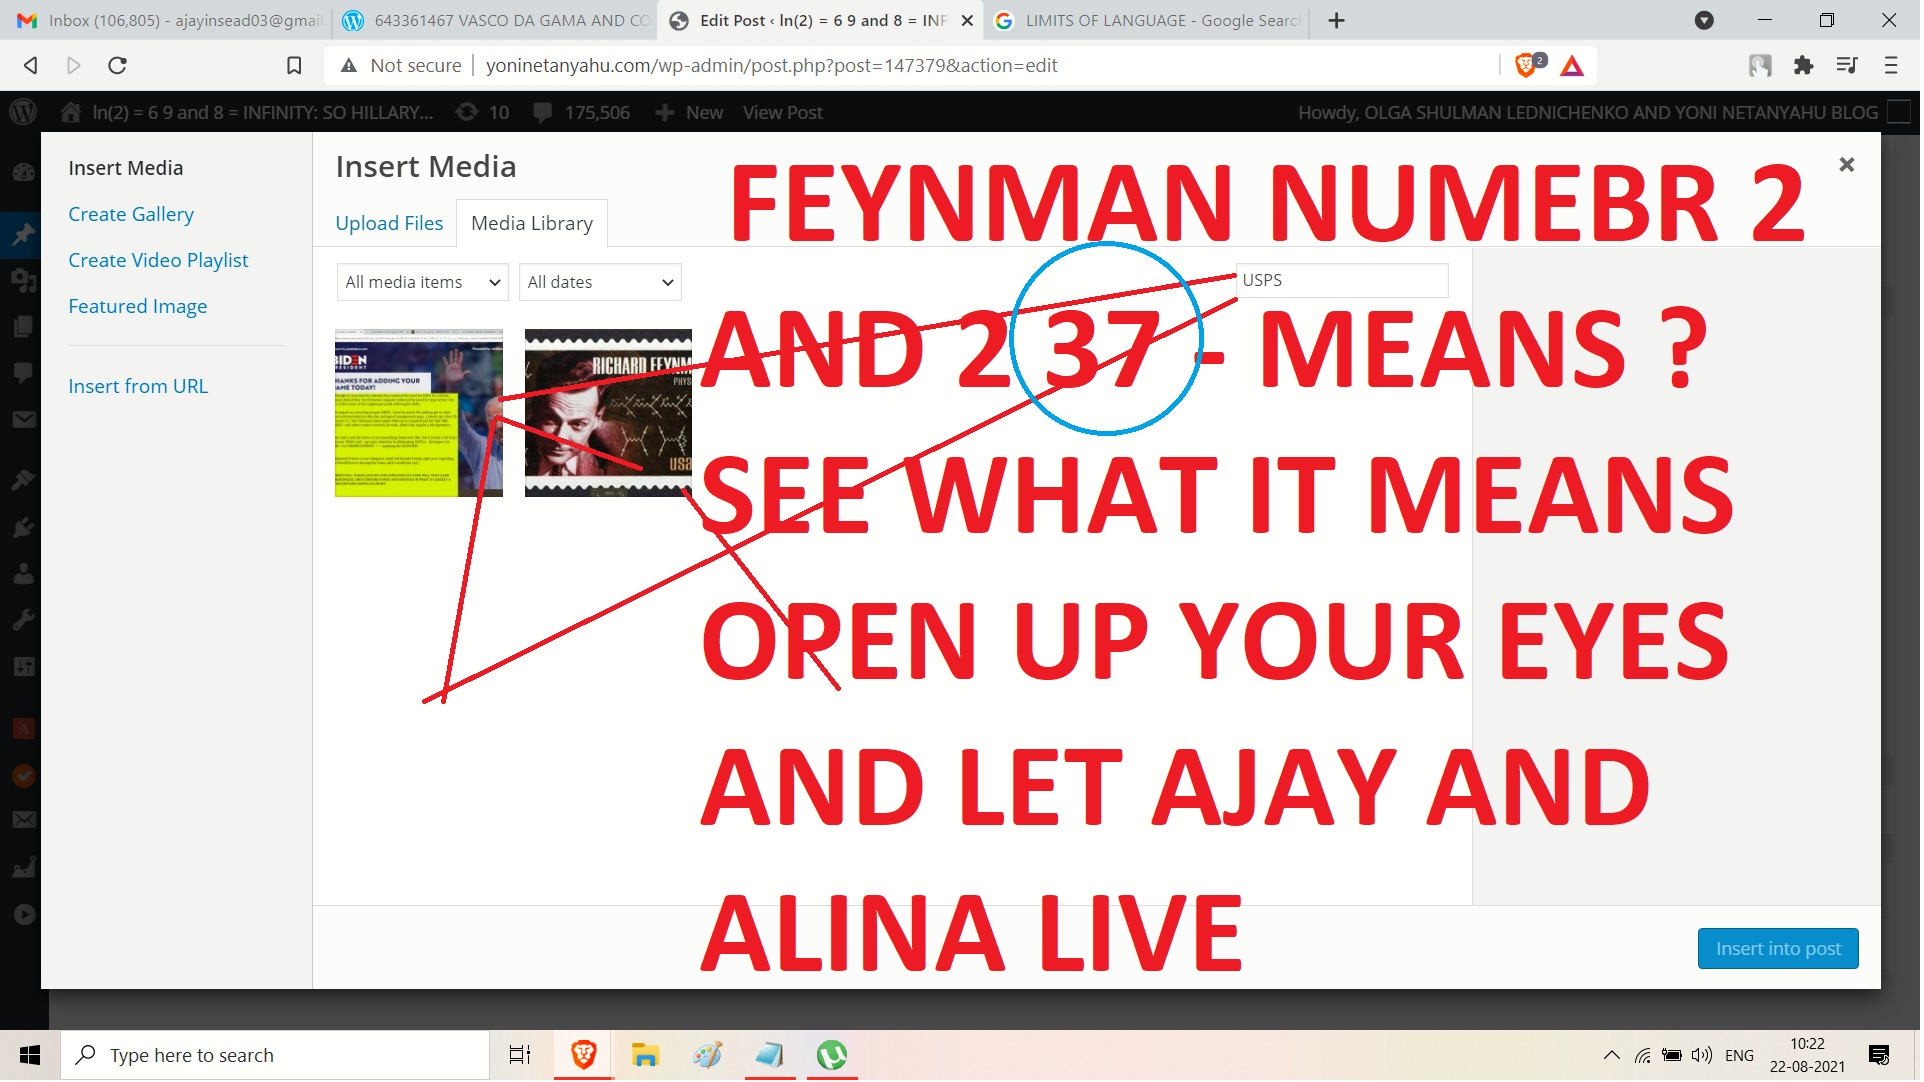 FEYNMAN-NUMBER-2-LETTERS-AND-237-MENS-CAMEROON-OK-DAVID-AND-SEE-WHAT-I-T-MENS-ND-USPS-AND-NOW-OPEN-YOUR-EYE-S-AND-LETAJAY-AND-ALINA-MATSENKO-LIVE1